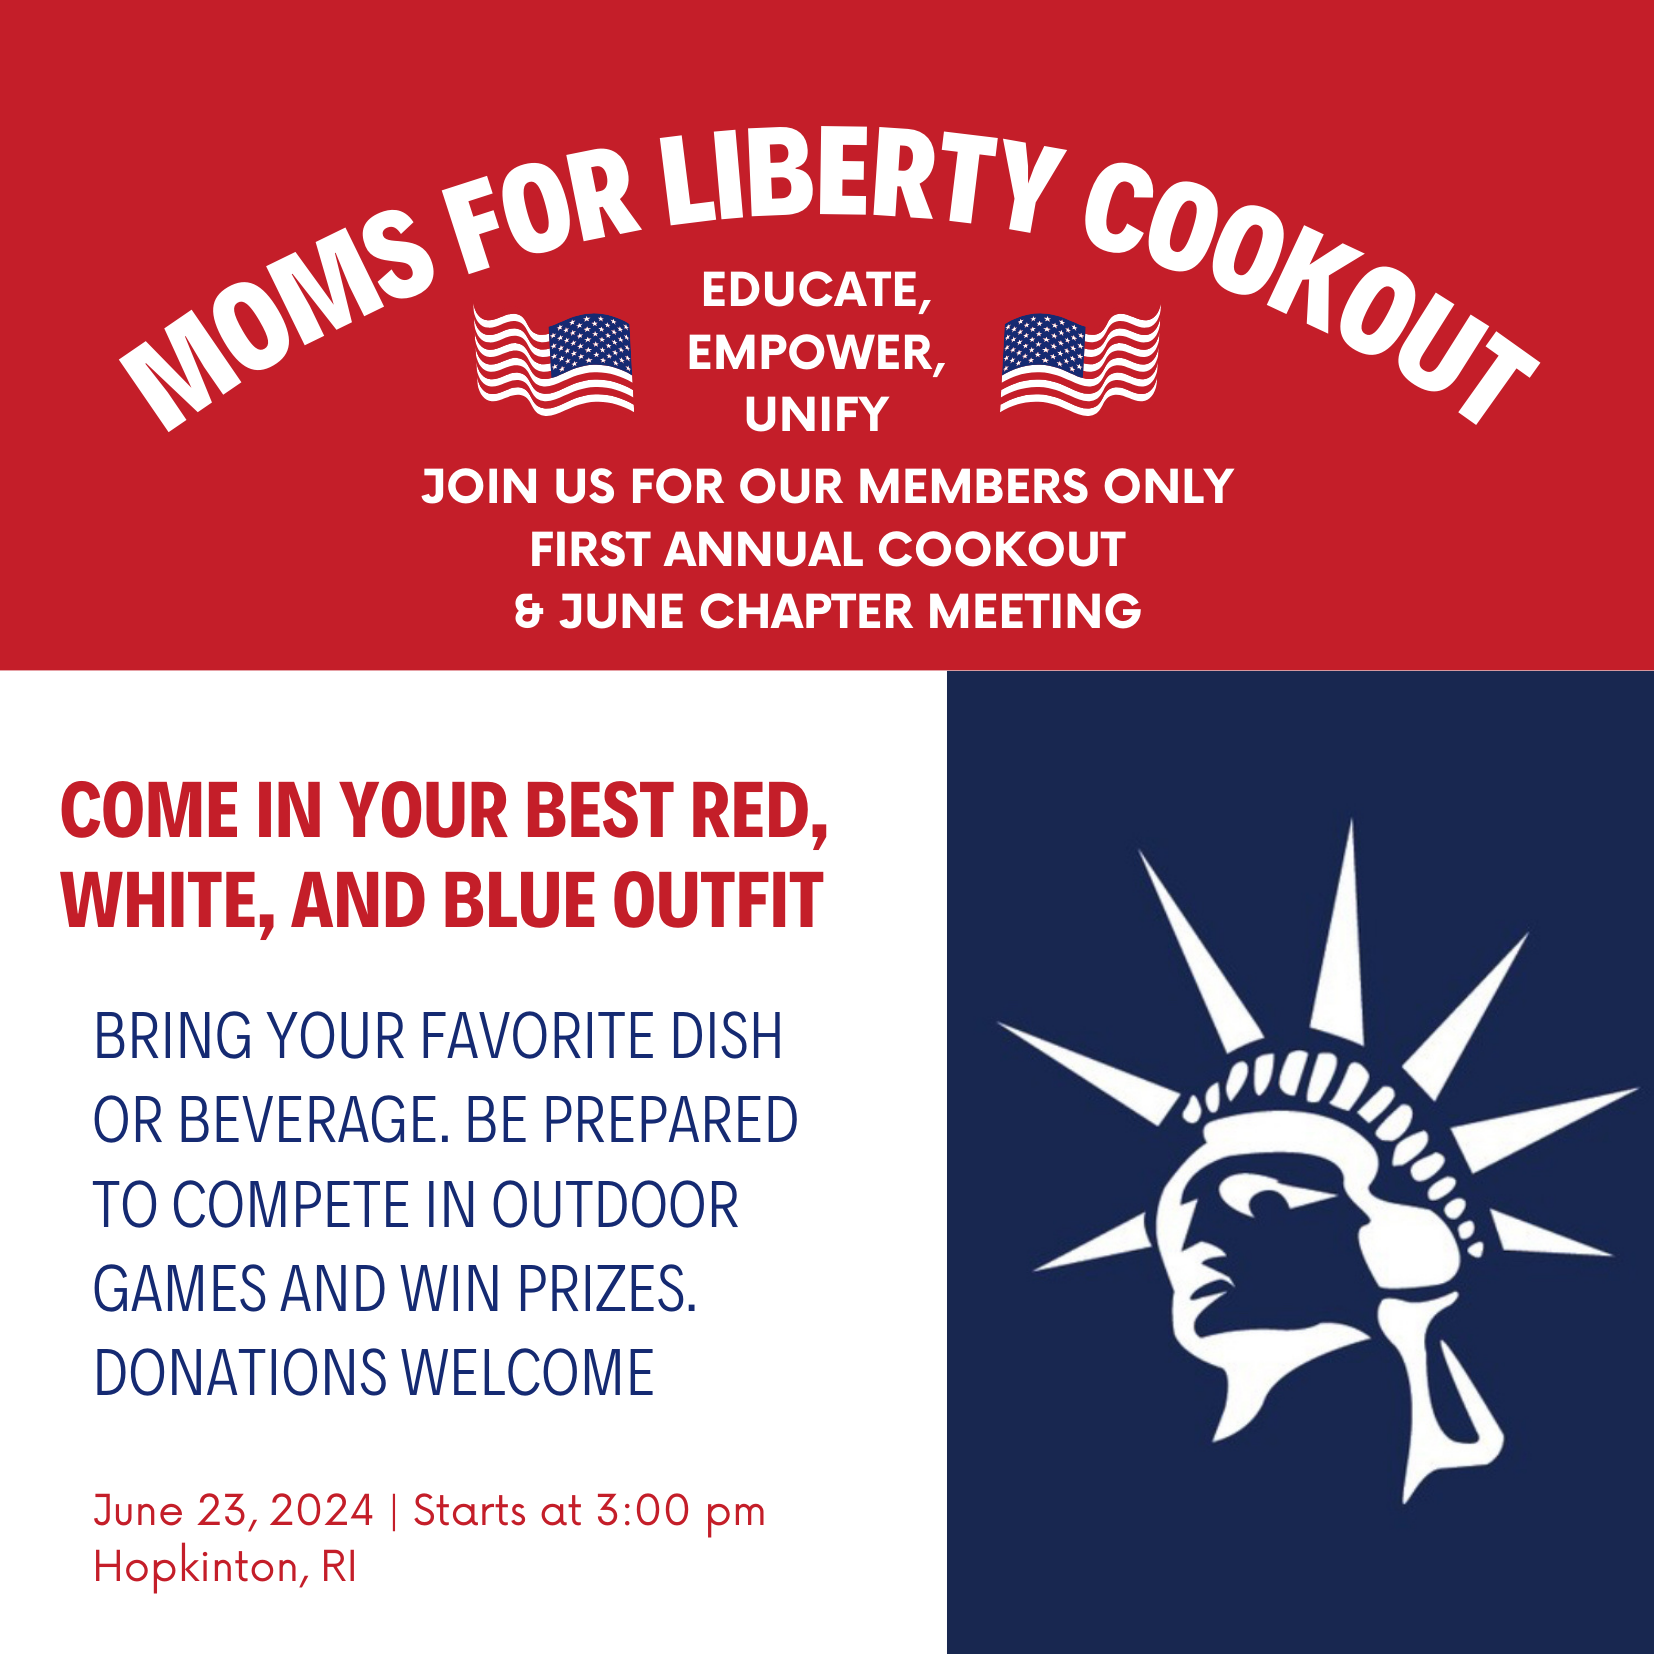 Moms For Liberty - Washington, RI Chapter Meeting and Cookout